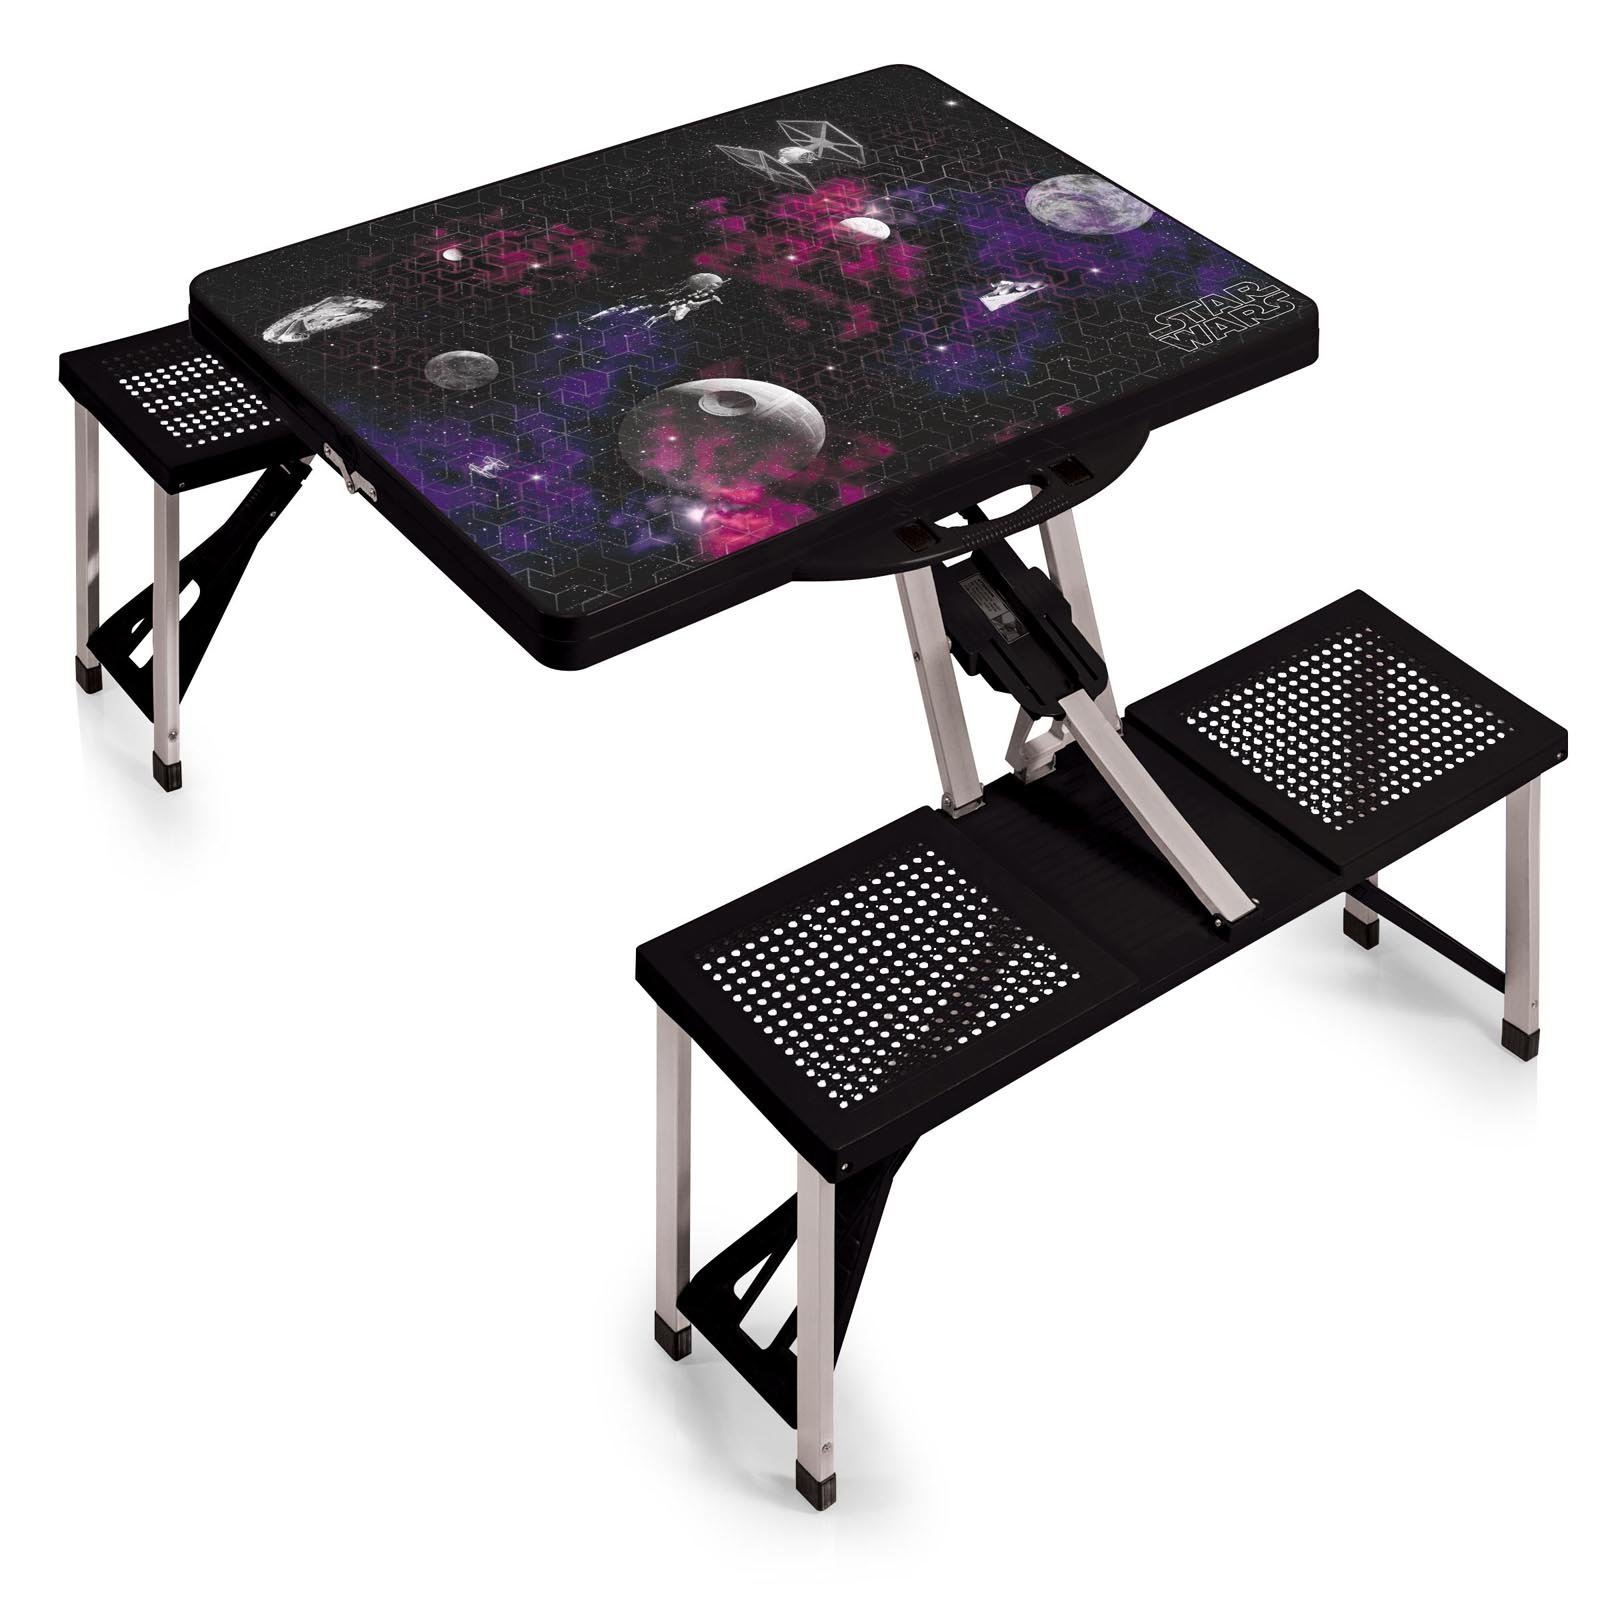 Picnic TimeStar Wars Portable Folding Table and Chair Set - image 1 of 7